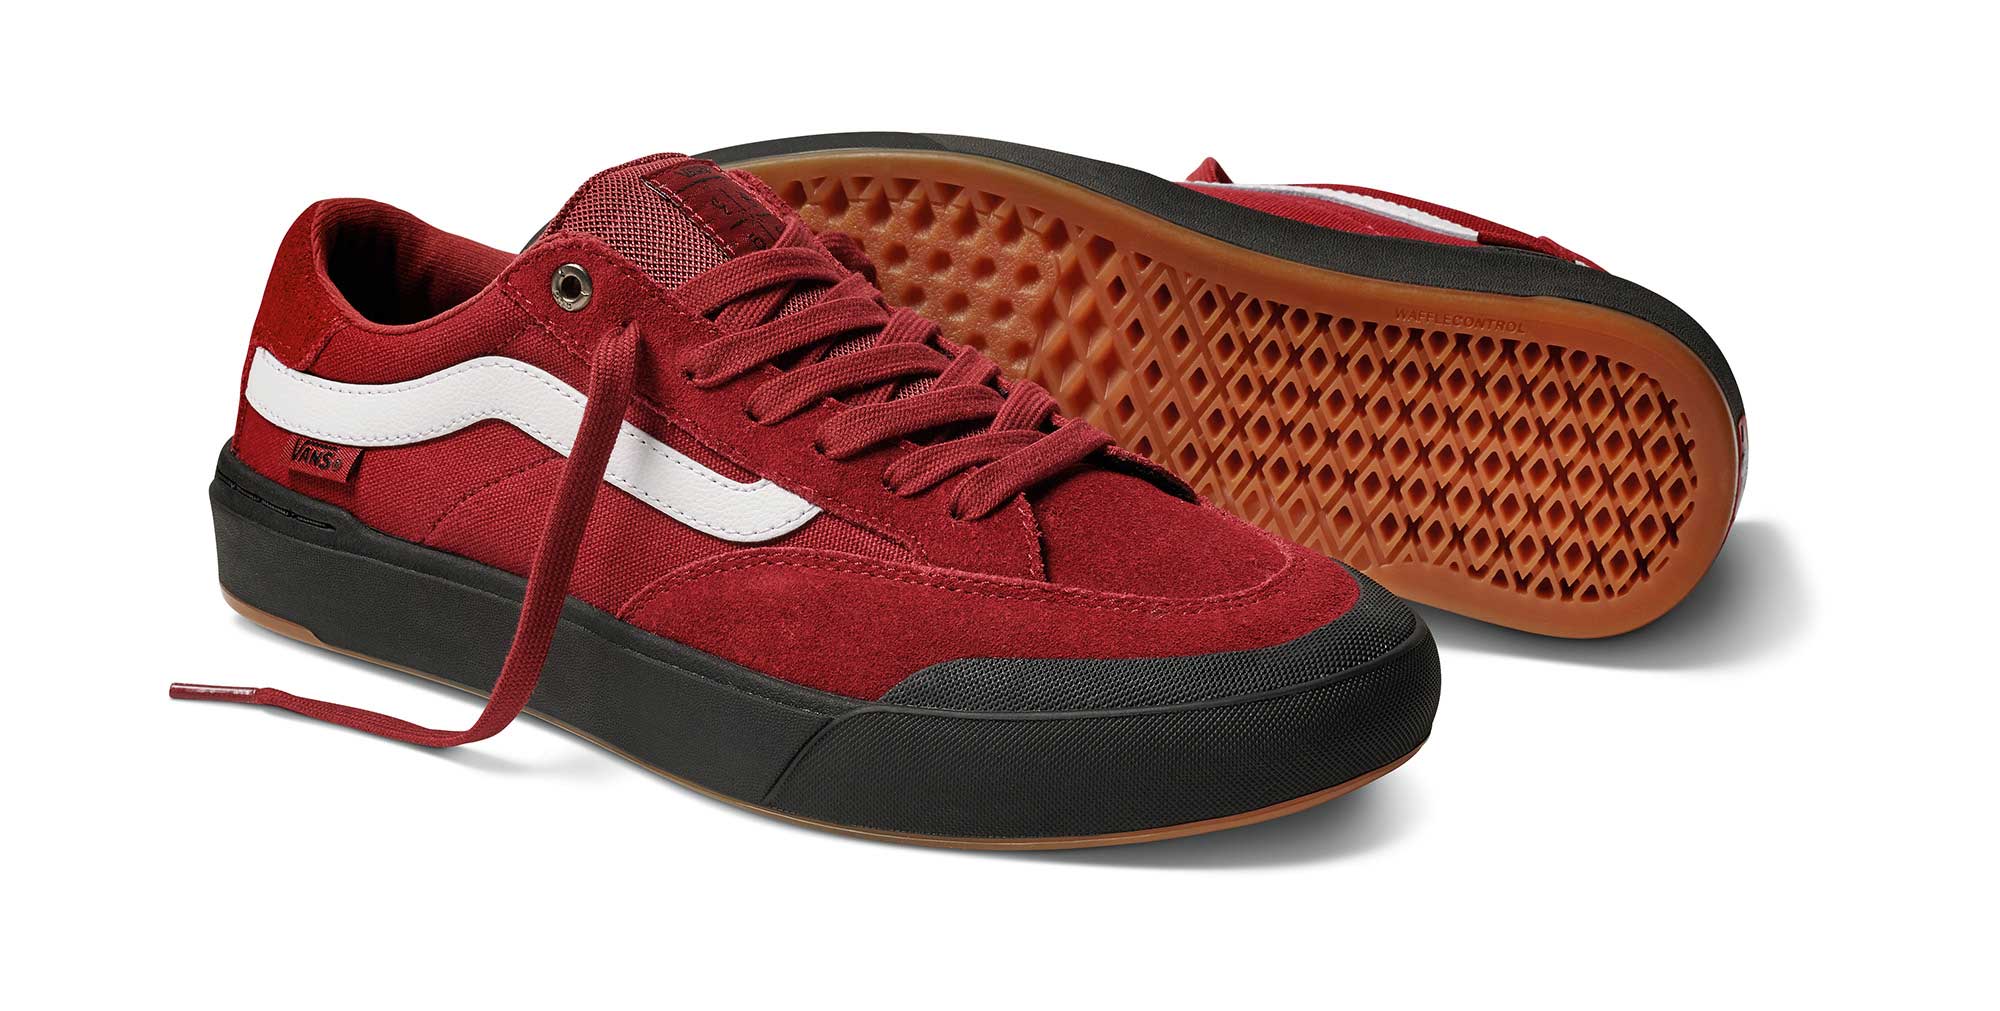 A First Look at Elijah Berle's New Pro Shoe from Vans - Manual Magazine